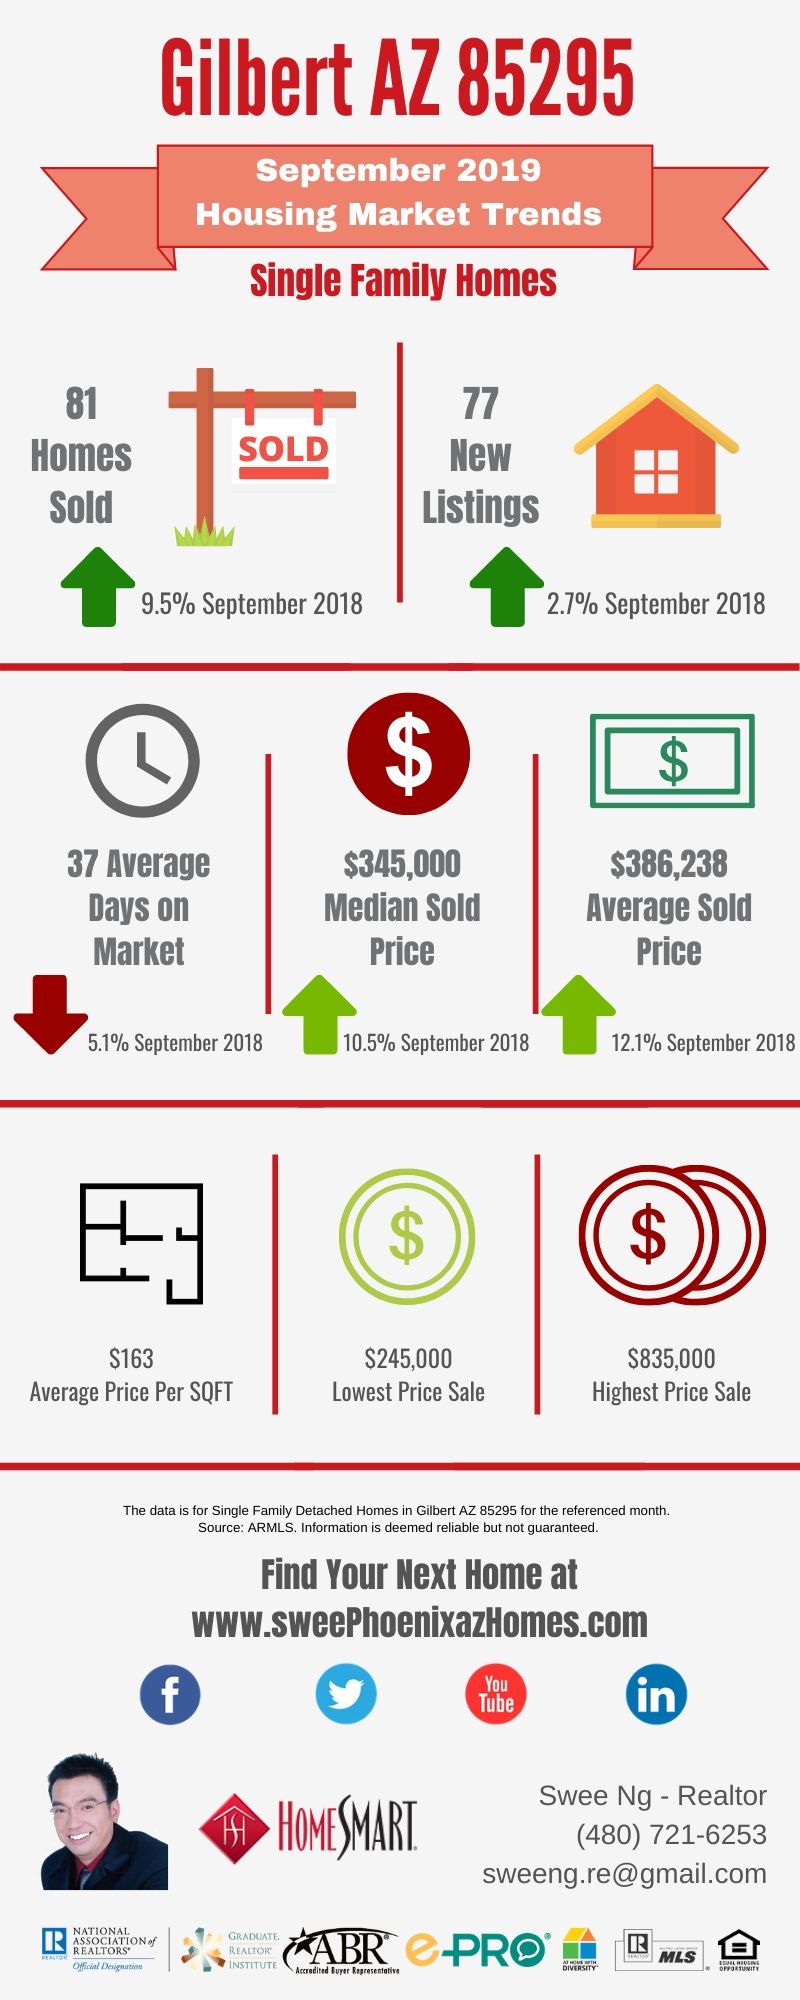 Gilbert AZ 85295 Housing Market Trends Report September 2019 by Swee Ng, Real Estate and House Value